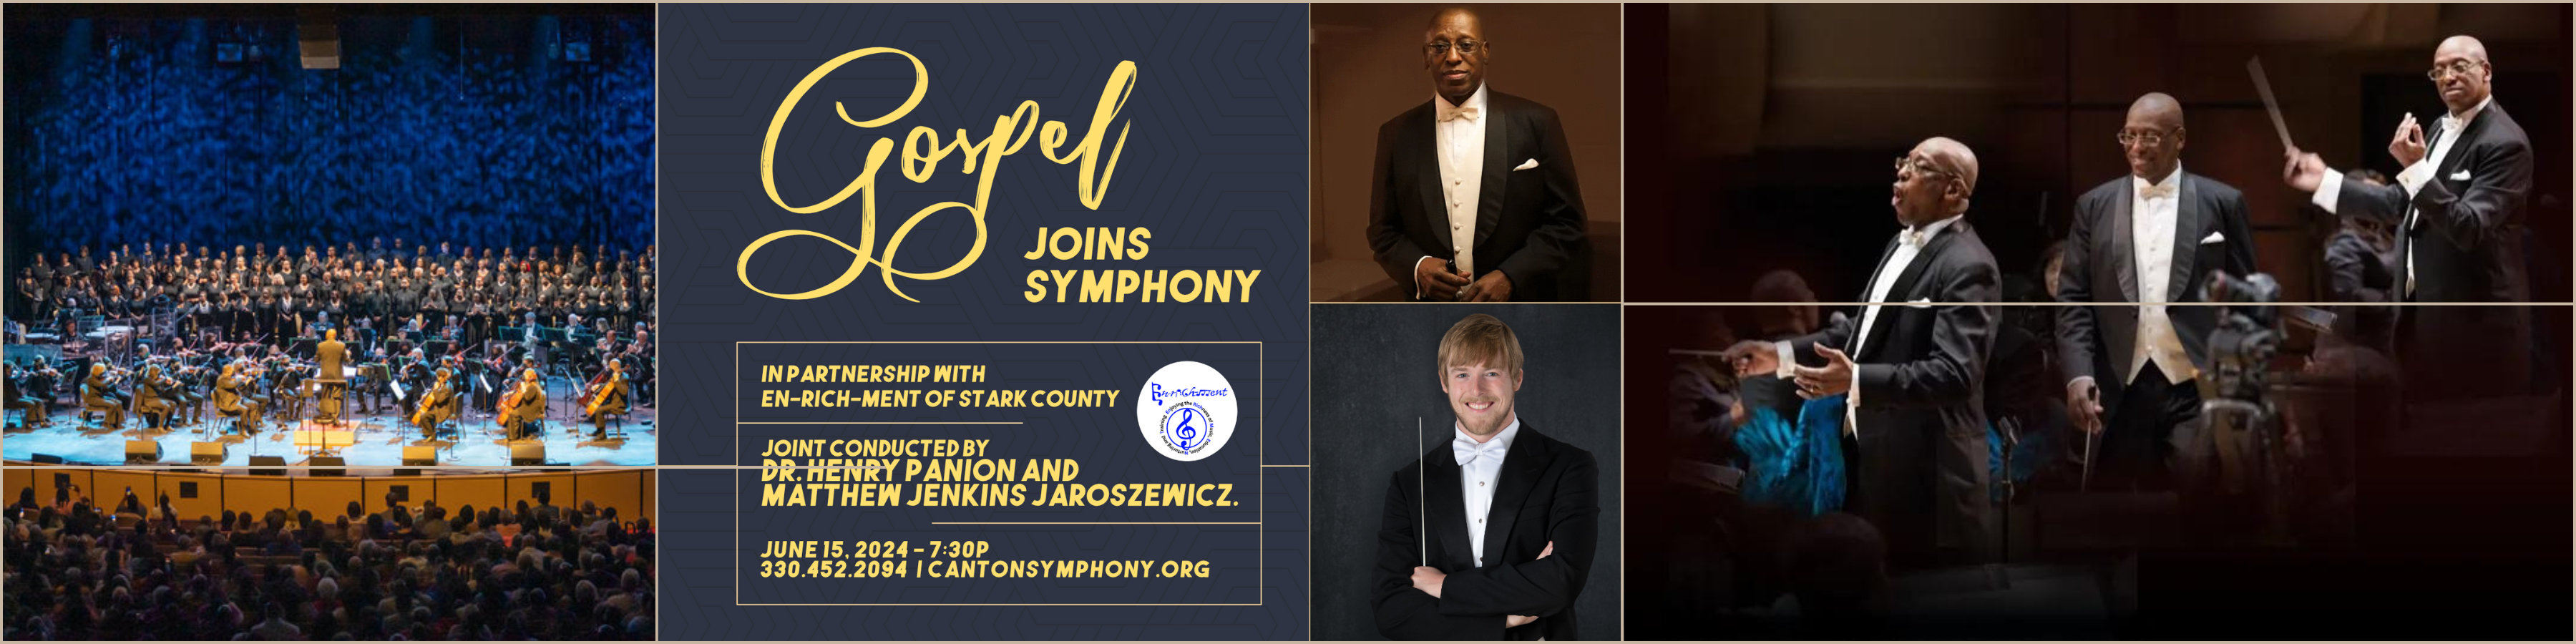 Image depicting concert graphic of the upcoming Gospel Joins Symphony. It depicts Dr. Henry Panion, III, our guest conductor, and Matthew Jenkins Jaroszewicz, our music director designate. The concert will take place on June 15th, 2024 at 7:30pm at Umstattd Hall within the Zimmermann Symphony Center. The concert is presented by Employers Health in partnership with En-Rich-Ment of Stark County.